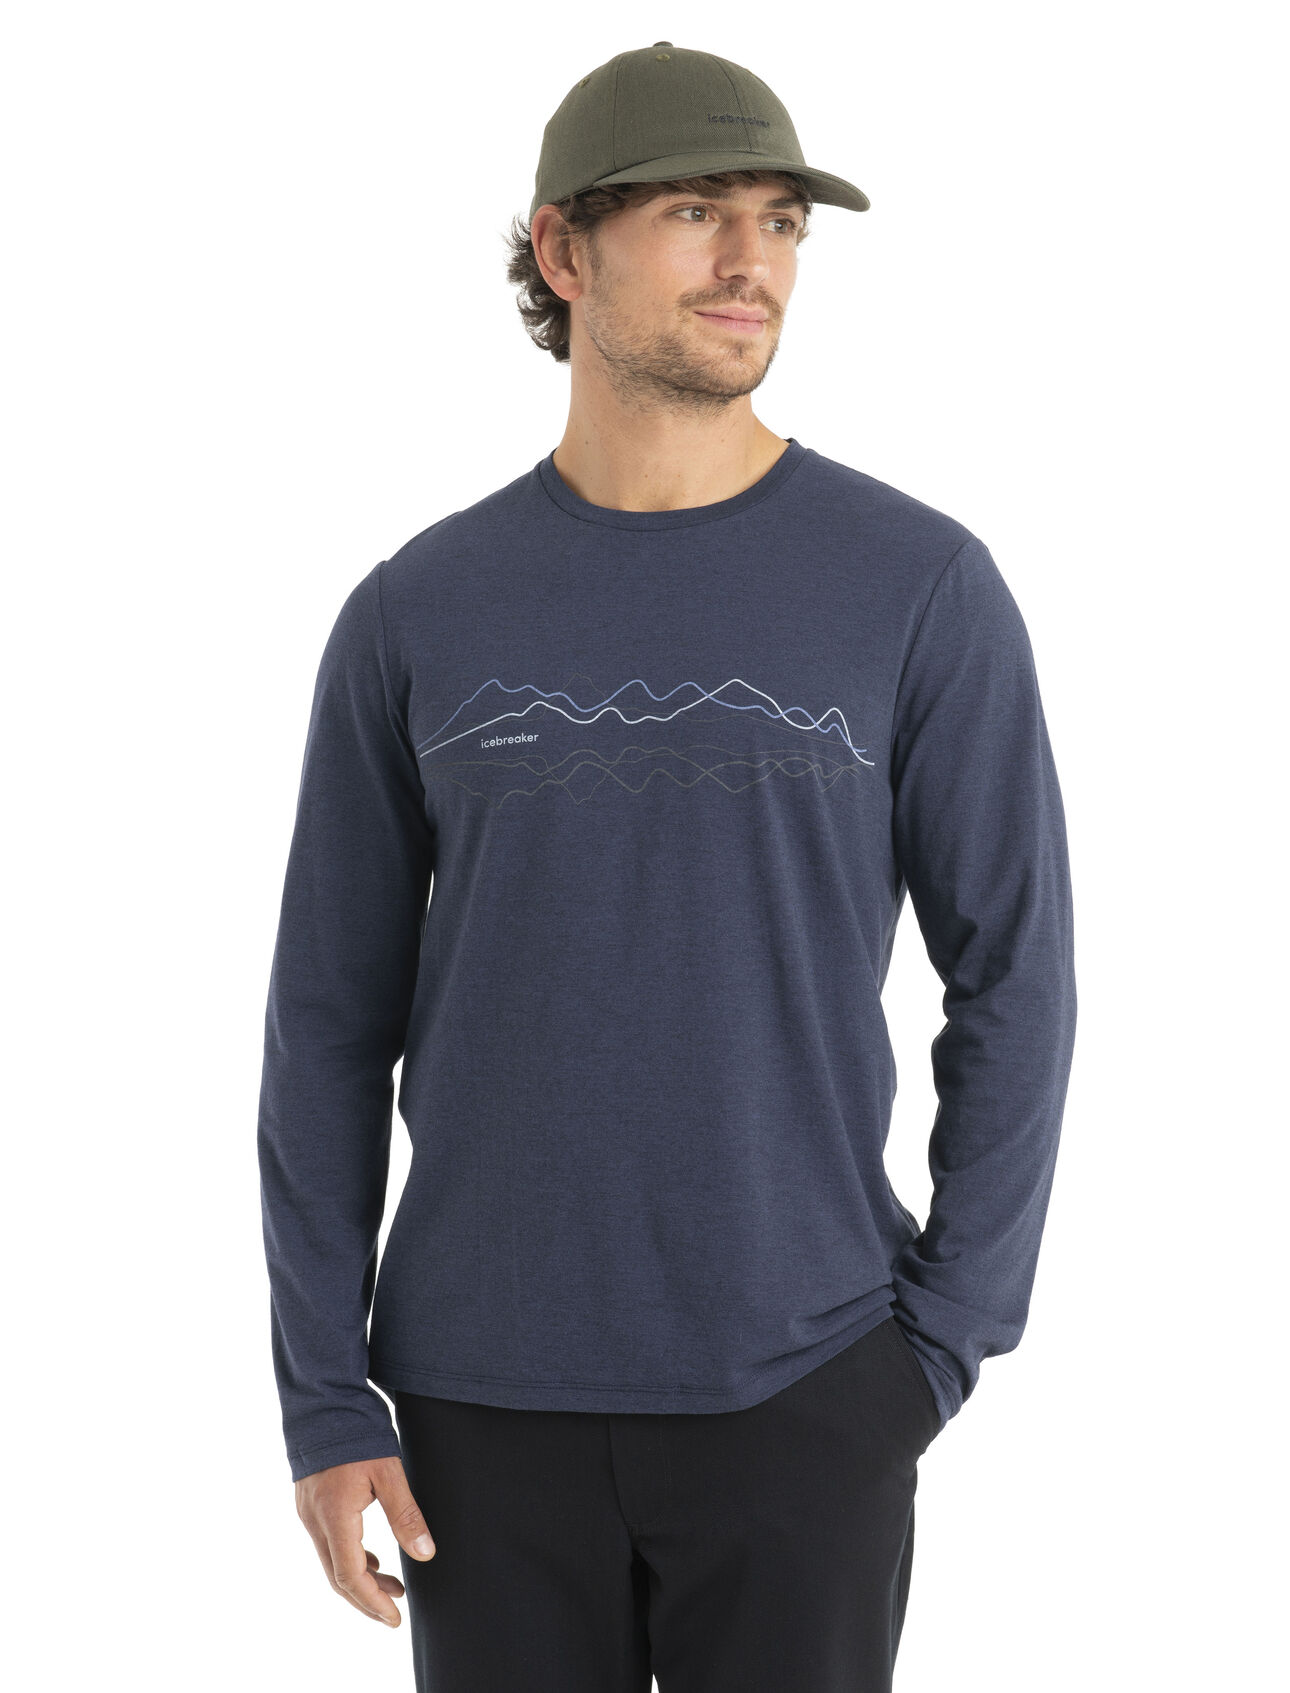 Mens Merino Central Classic Long Sleeve T-Shirt Icebreaker Central to your wardrobe and as classic as they come, the Central Classic Long Sleeve Tee Icebreaker is a go-to tee featuring a soft jersey blend of merino wool and organic cotton.